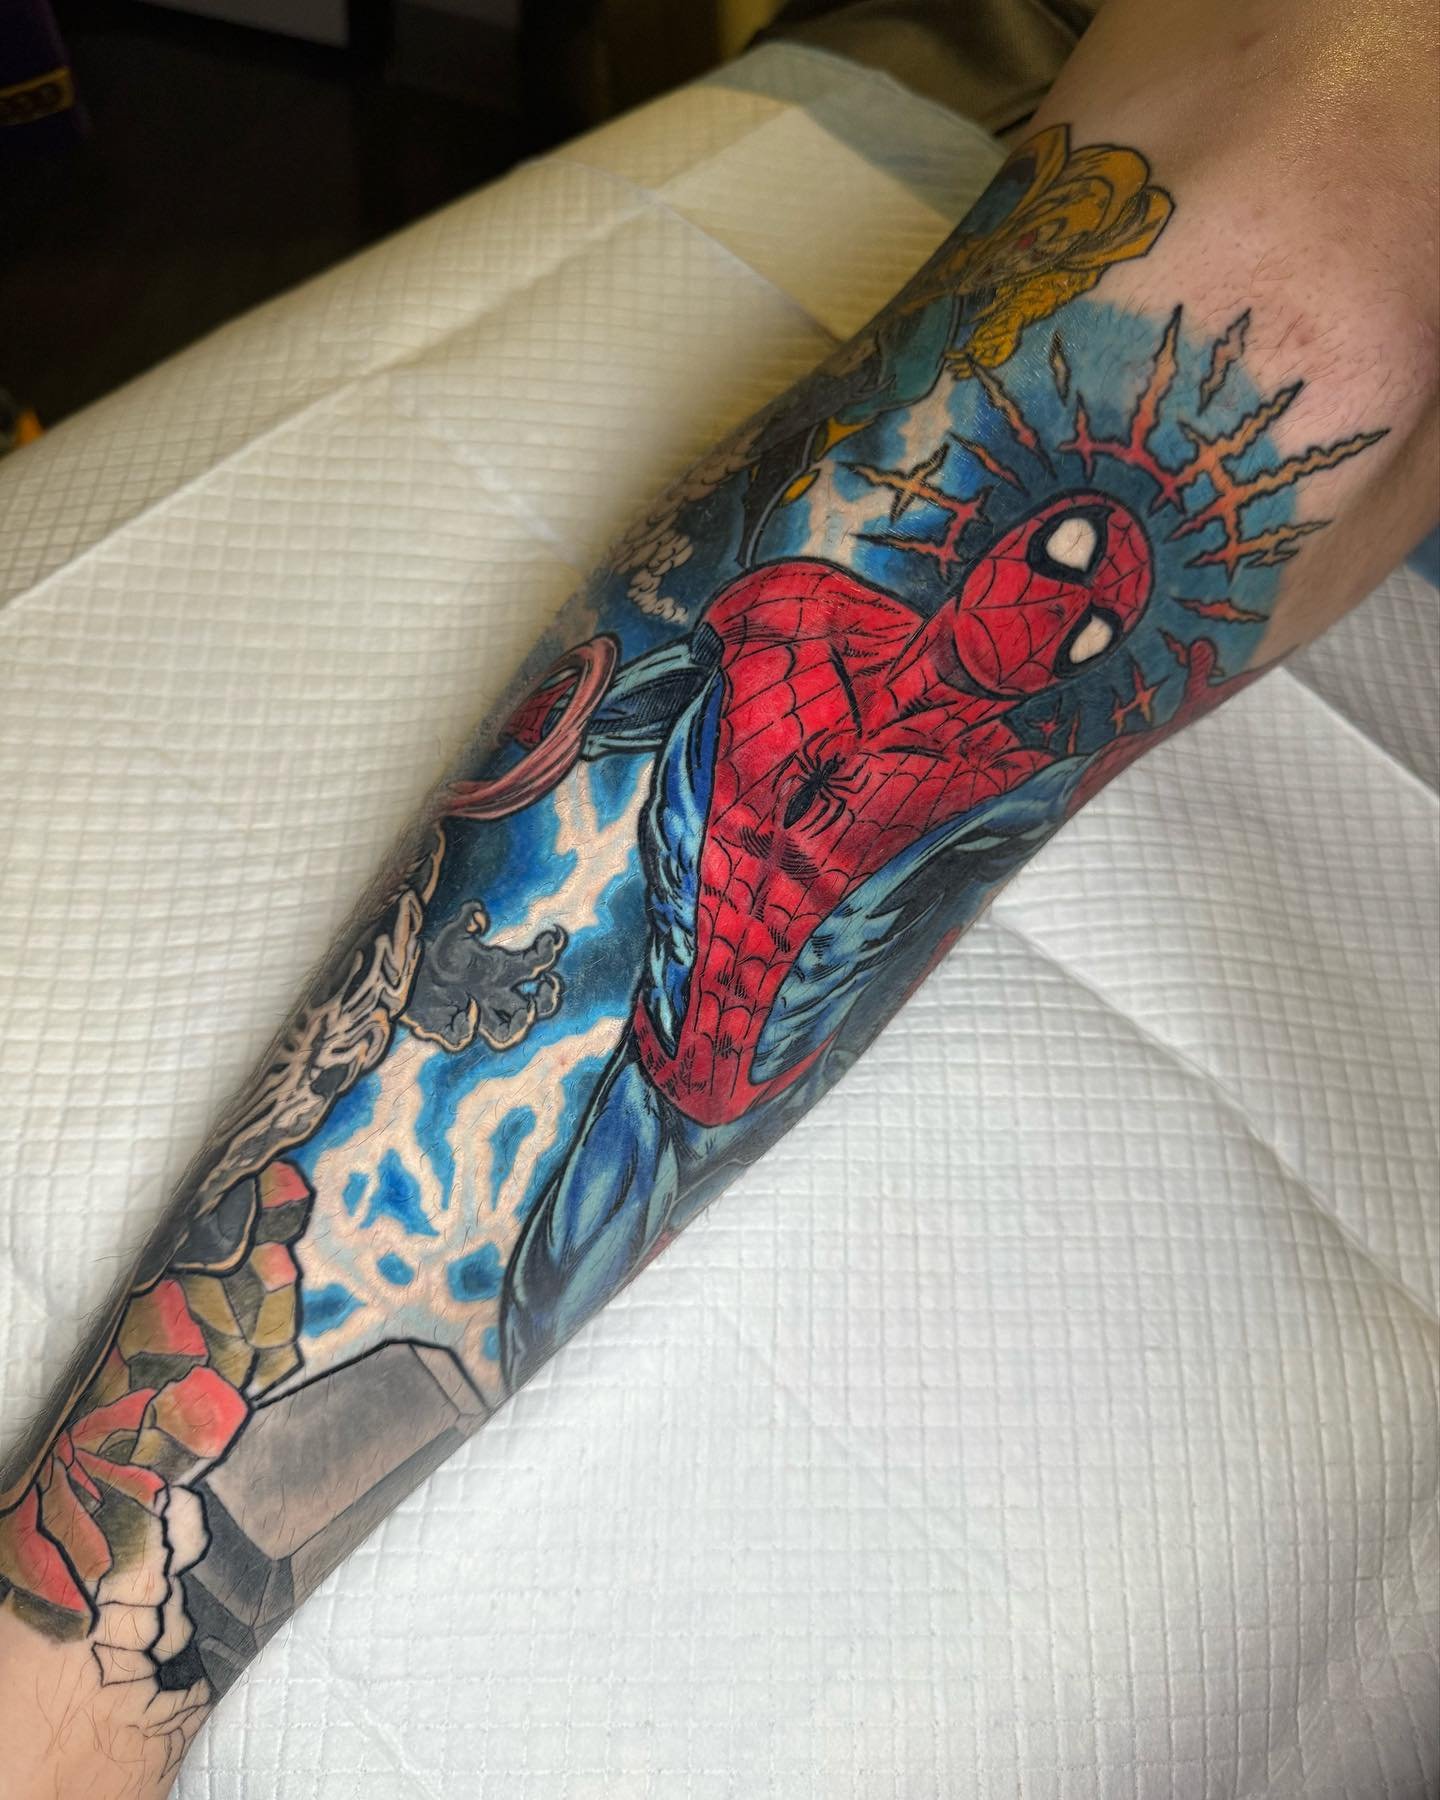 Done by Carl Fuchs @carlfuchs #carlfuchs #carlfuchstattoos #red5va
&bull;
To book with Carl, call the studio for consult times, and information.